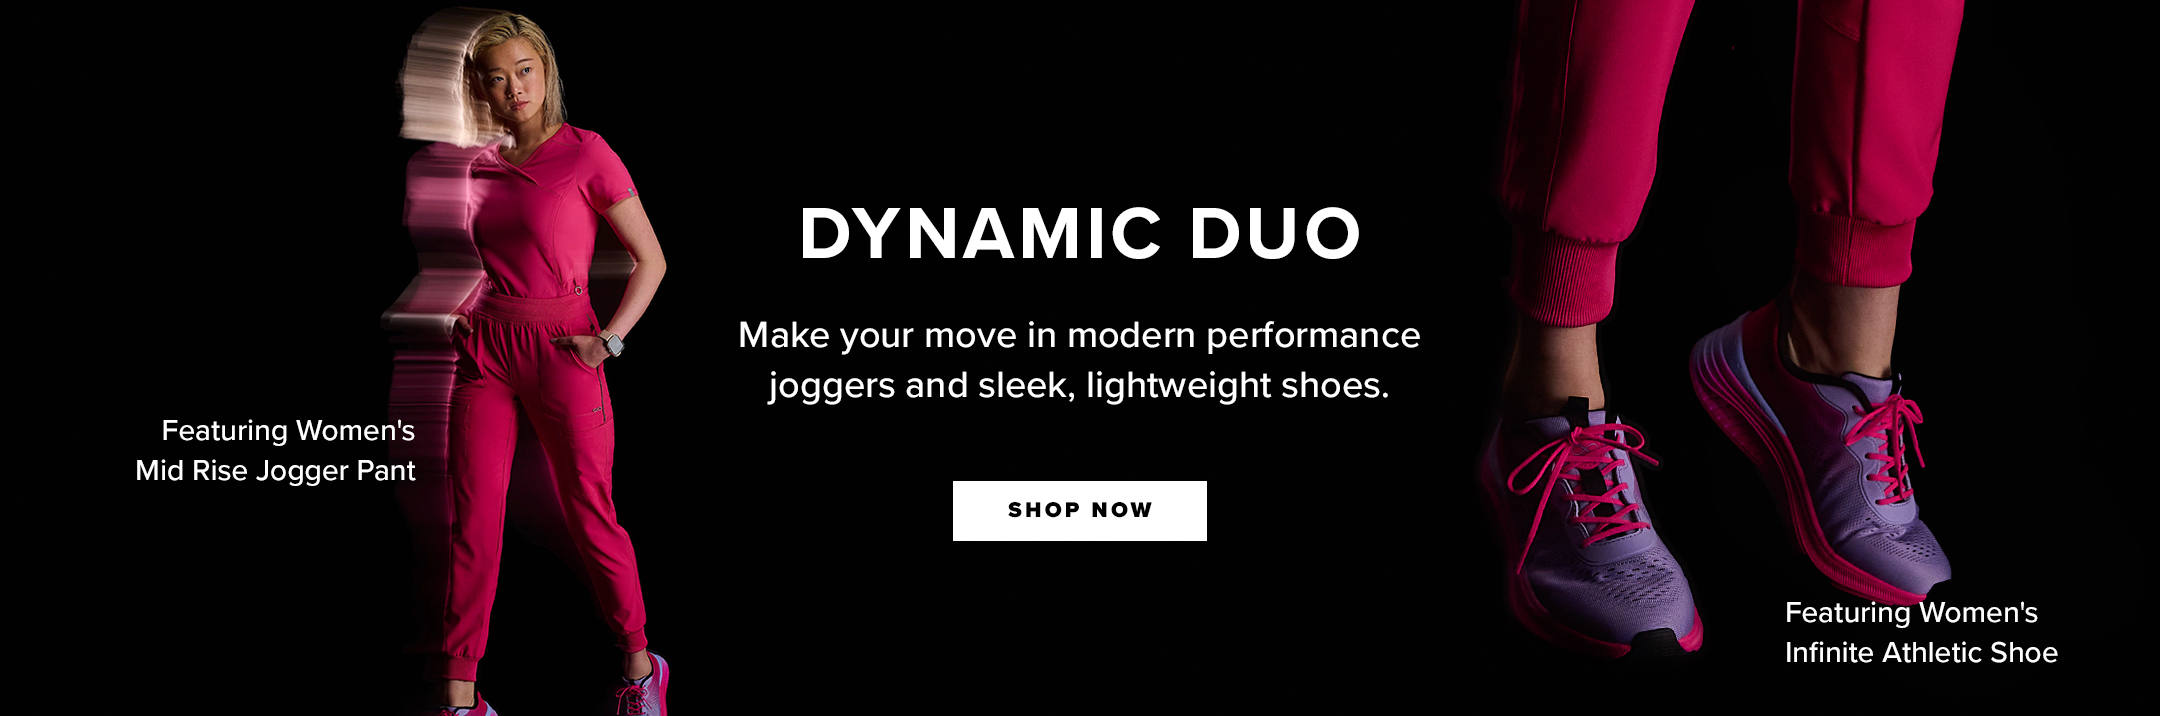 Shop DYNAMIC DUO
Make your move in modern performance joggers and sleek, lightweight shoes.